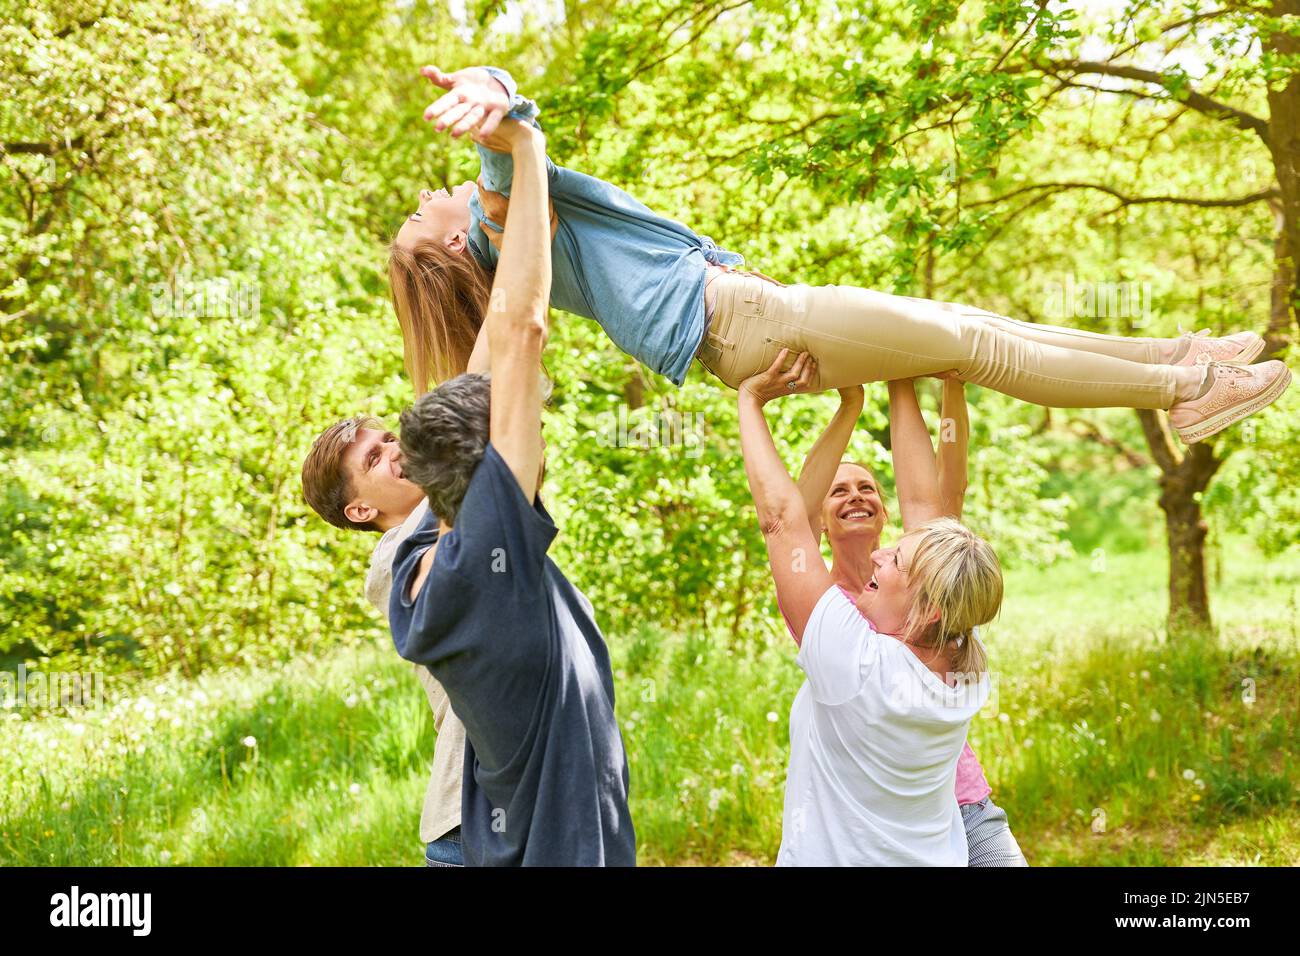 Athletic team of young people lift a woman up in the air together as a team building exercise Stock Photo